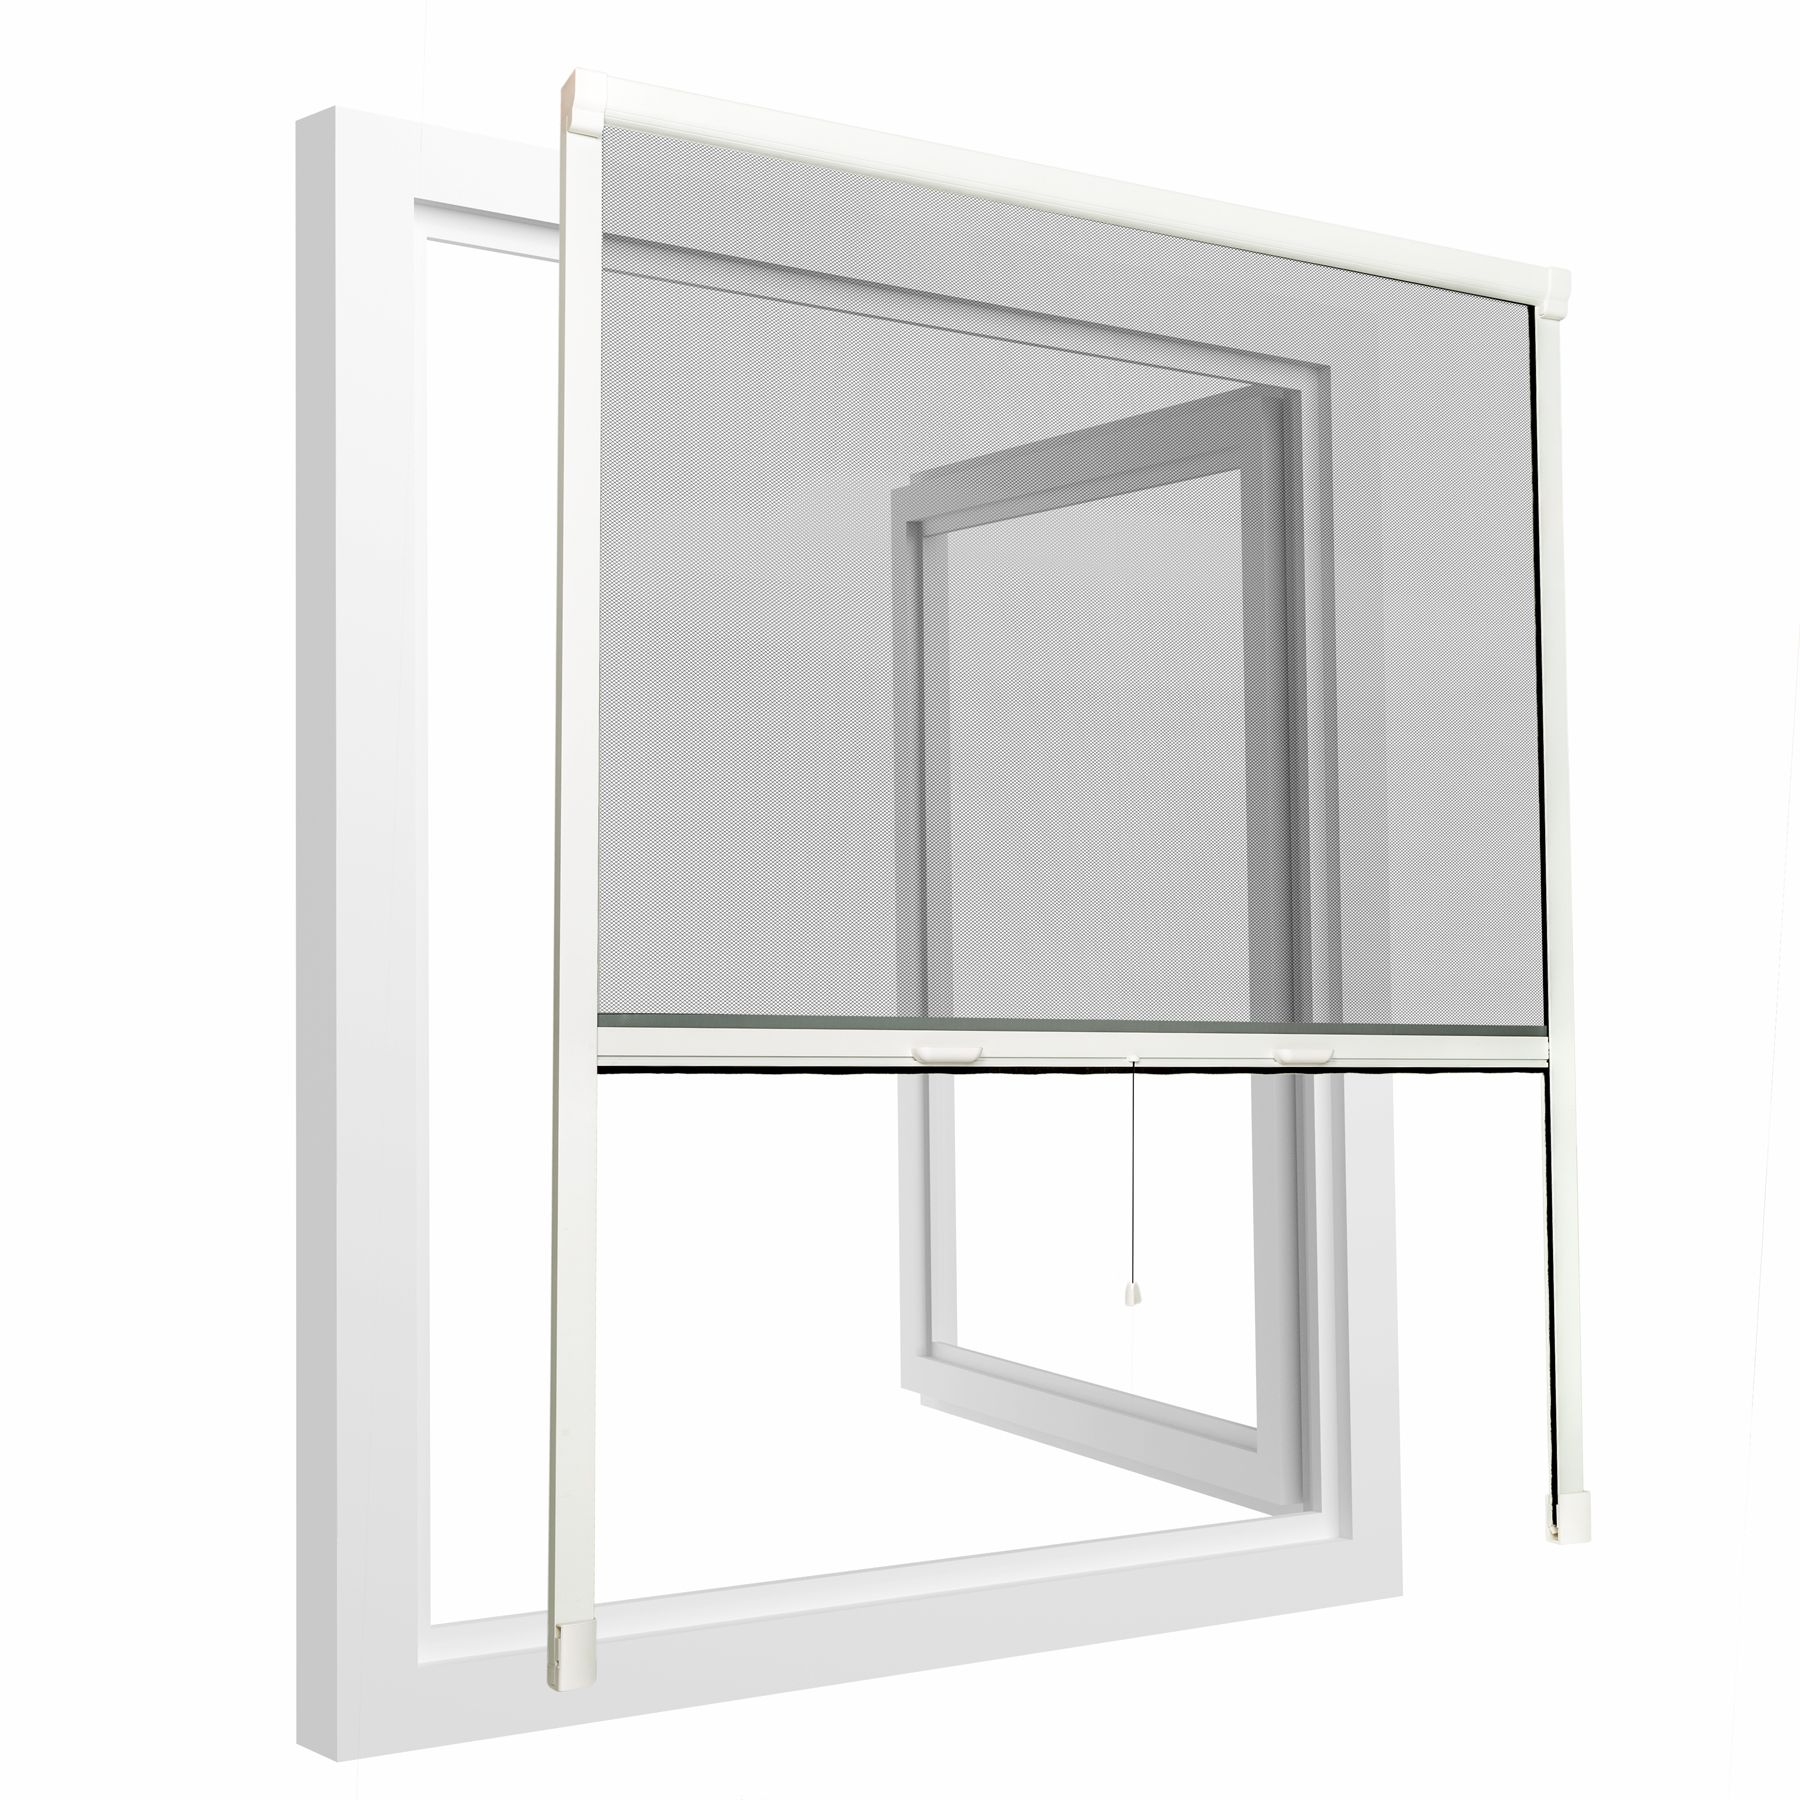 Reasonable price for Aluminum Awning - DIY Roller Insect Screen Window – Charlotte